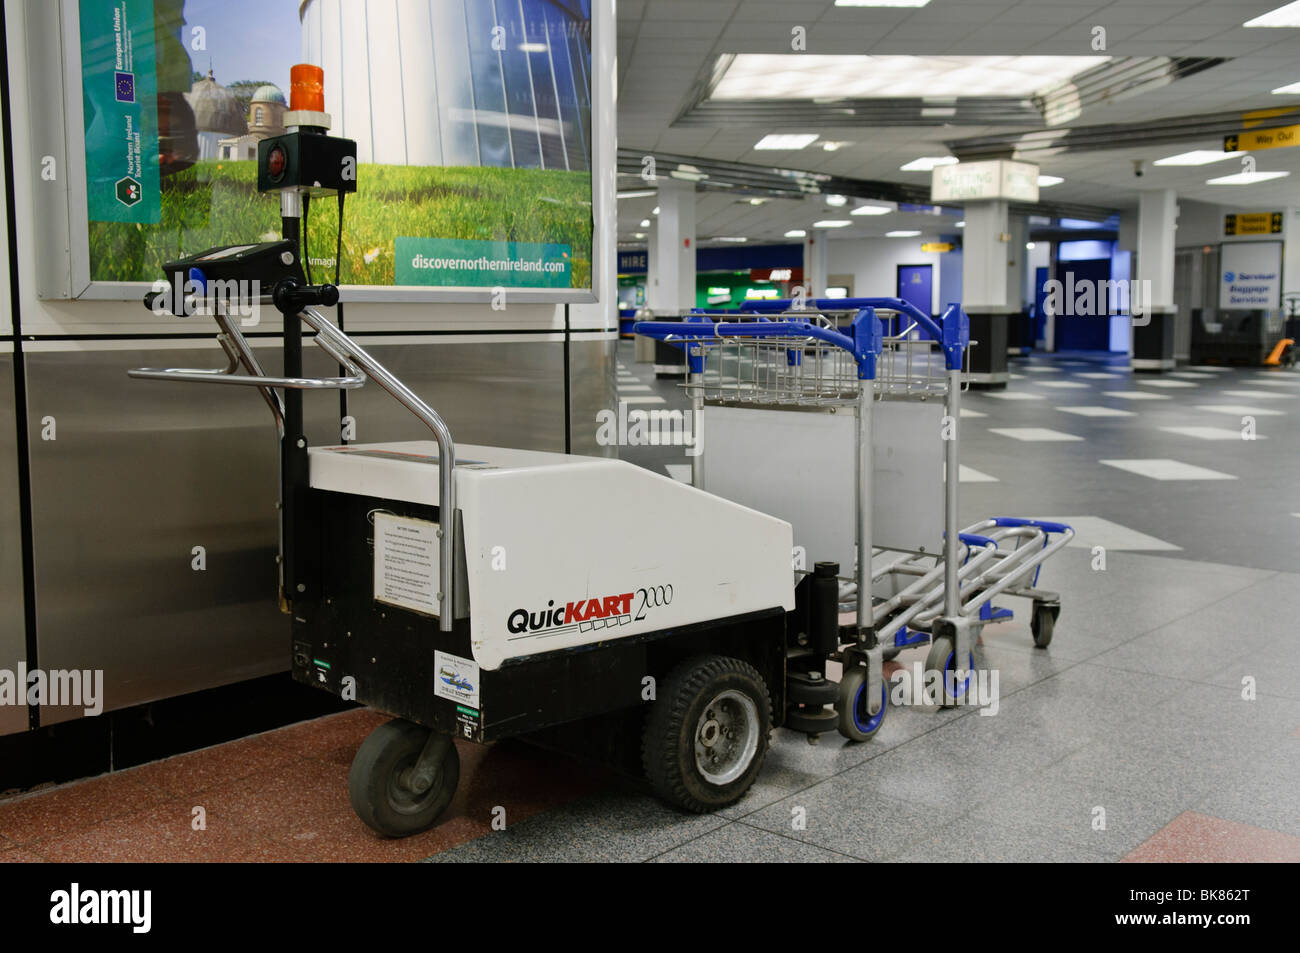 Small electric tractor unit for collecting and moving trolleys at an airport Stock Photo